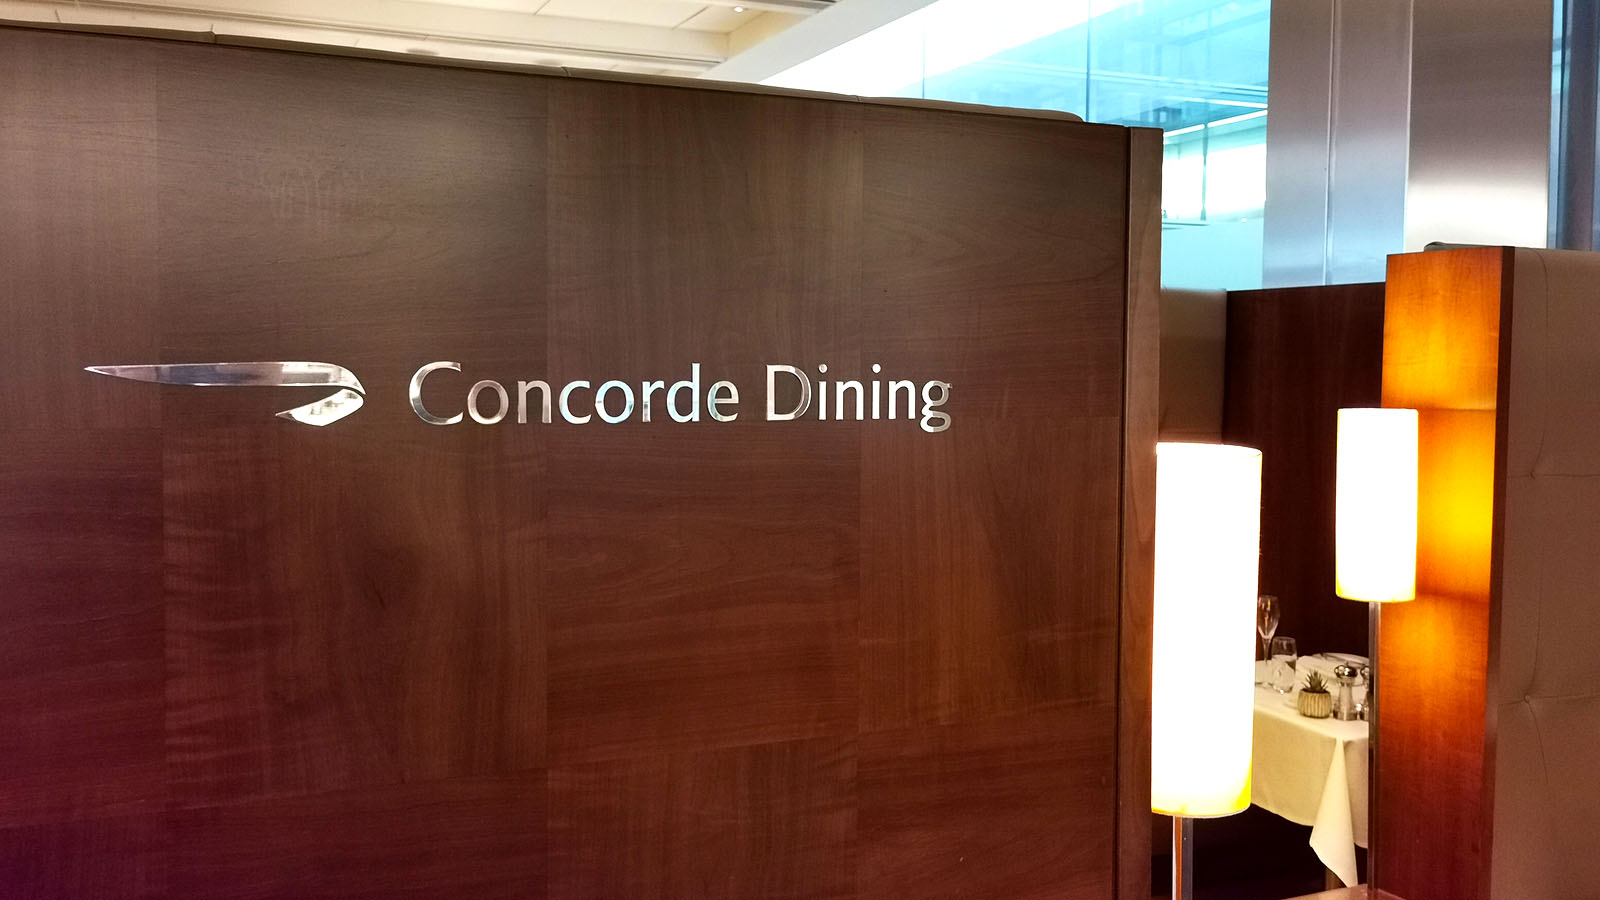 Dining room in the BA Concorde Room at London Heathrow